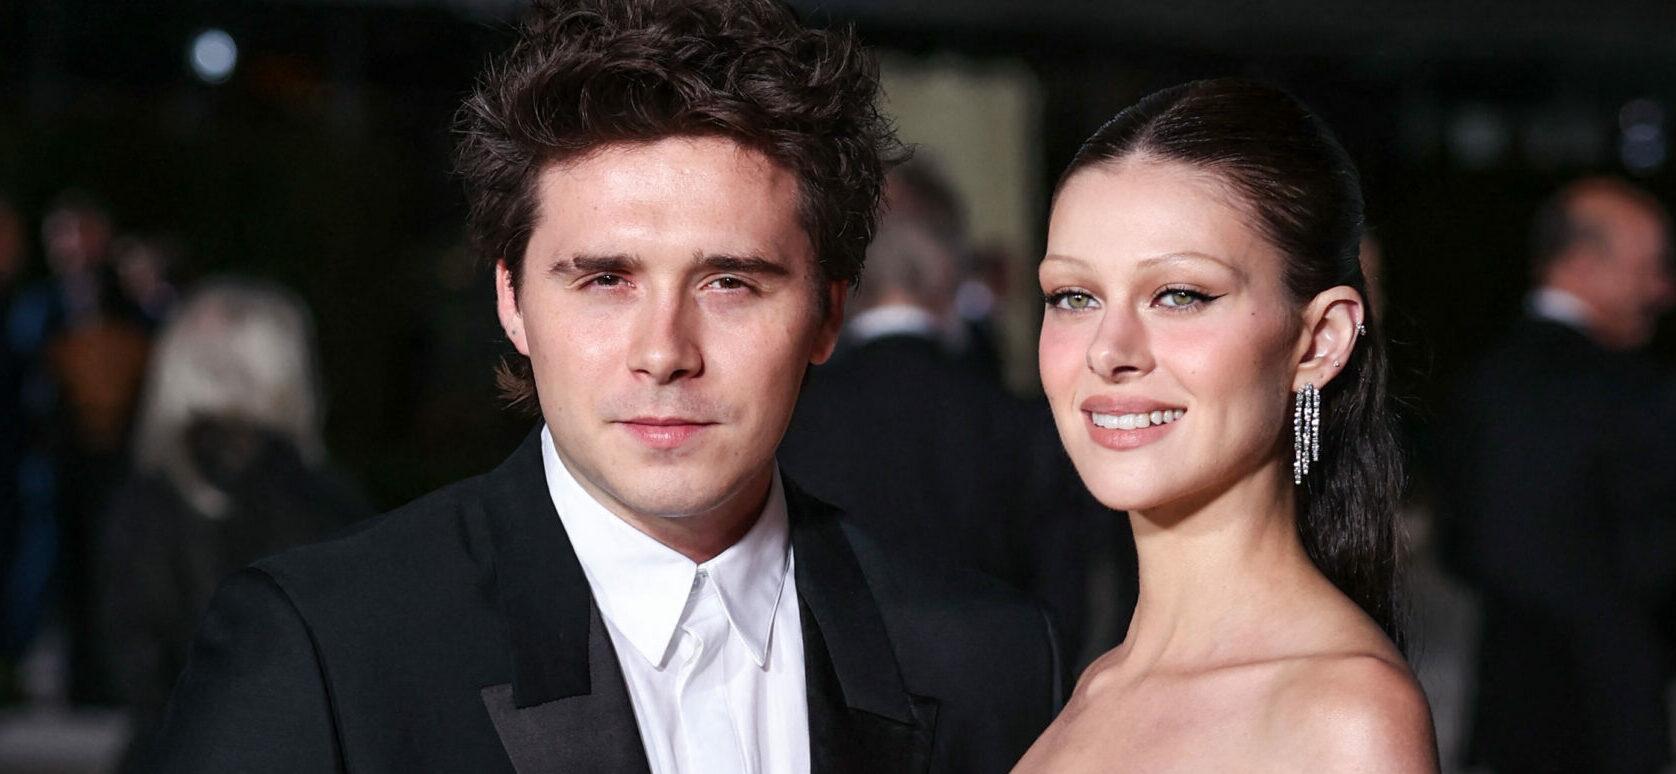 Brooklyn Beckham Says Wife Nicola Peltz ‘Changes His Life’ In Touching Birthday Tribute